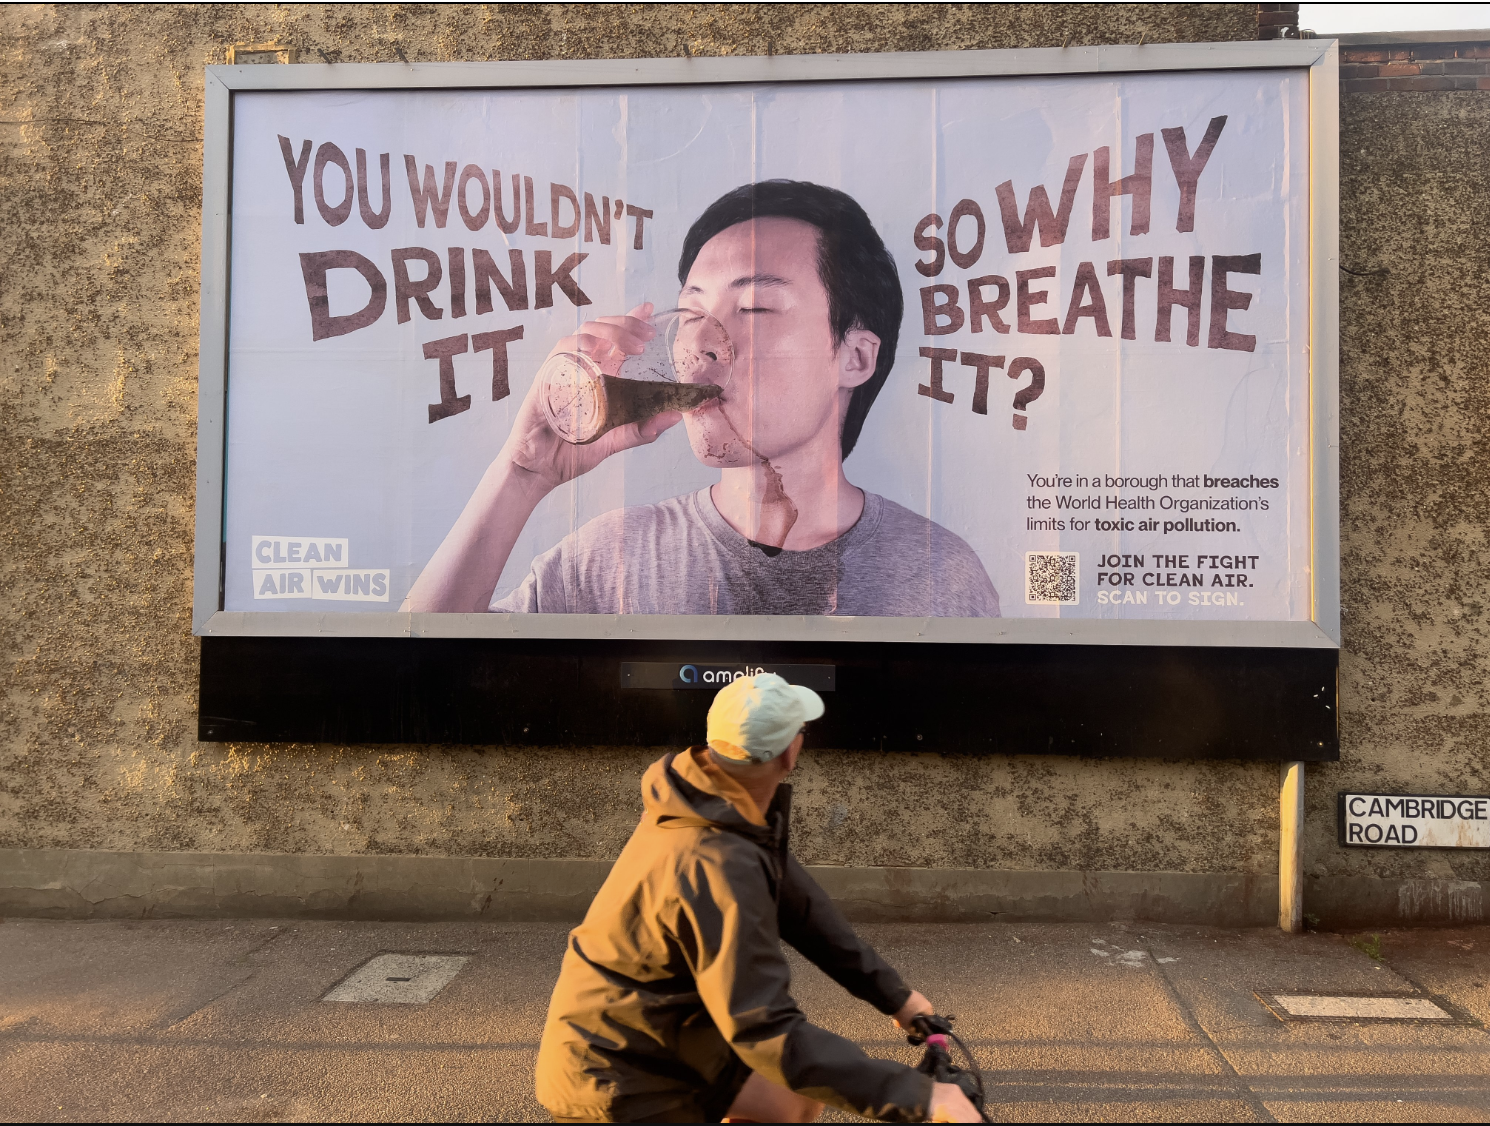 poster in street says: you wouldnt drink it - so why breath it